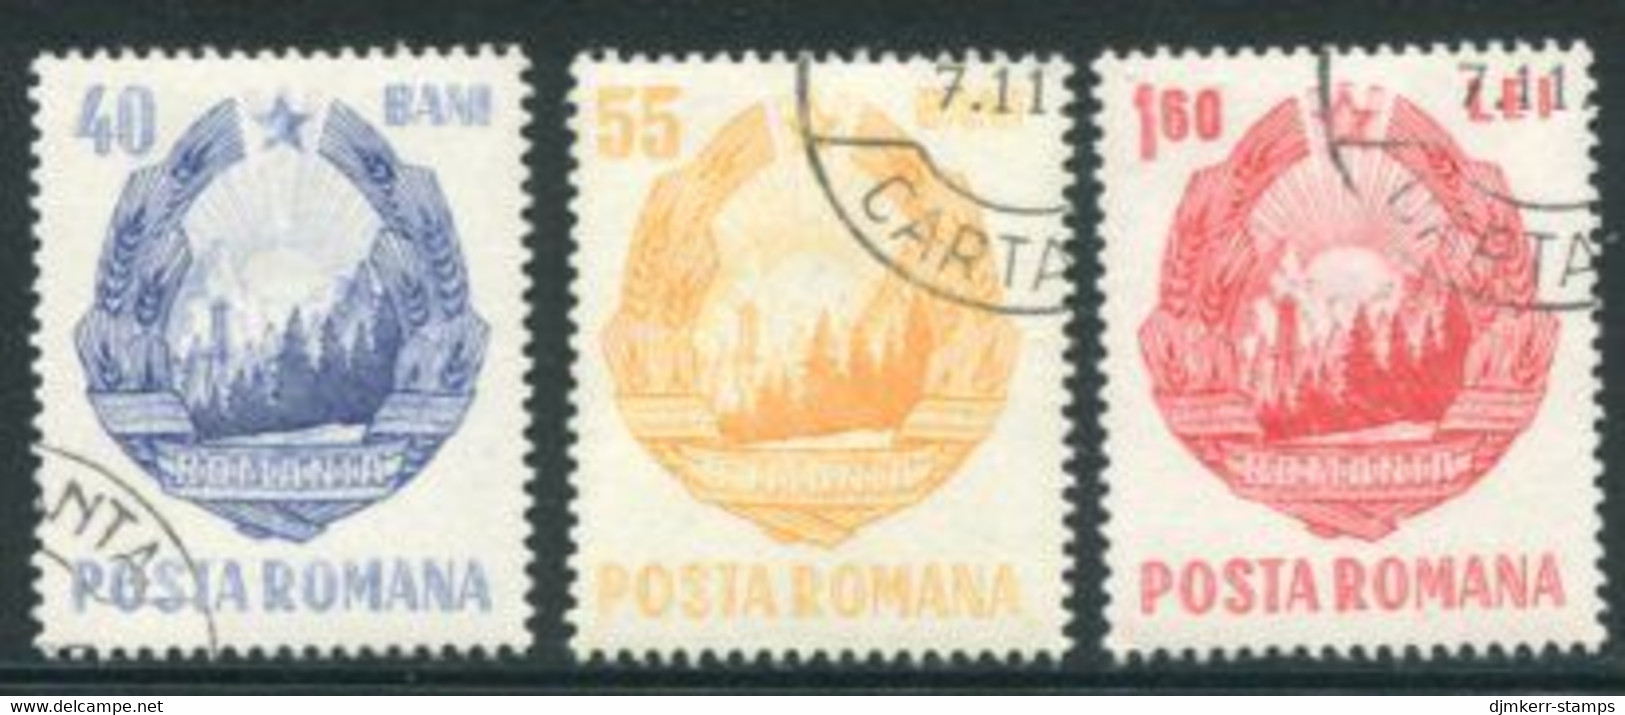 ROMANIA 1967 State Arms Used.  Michel 2631-33 - Gebraucht